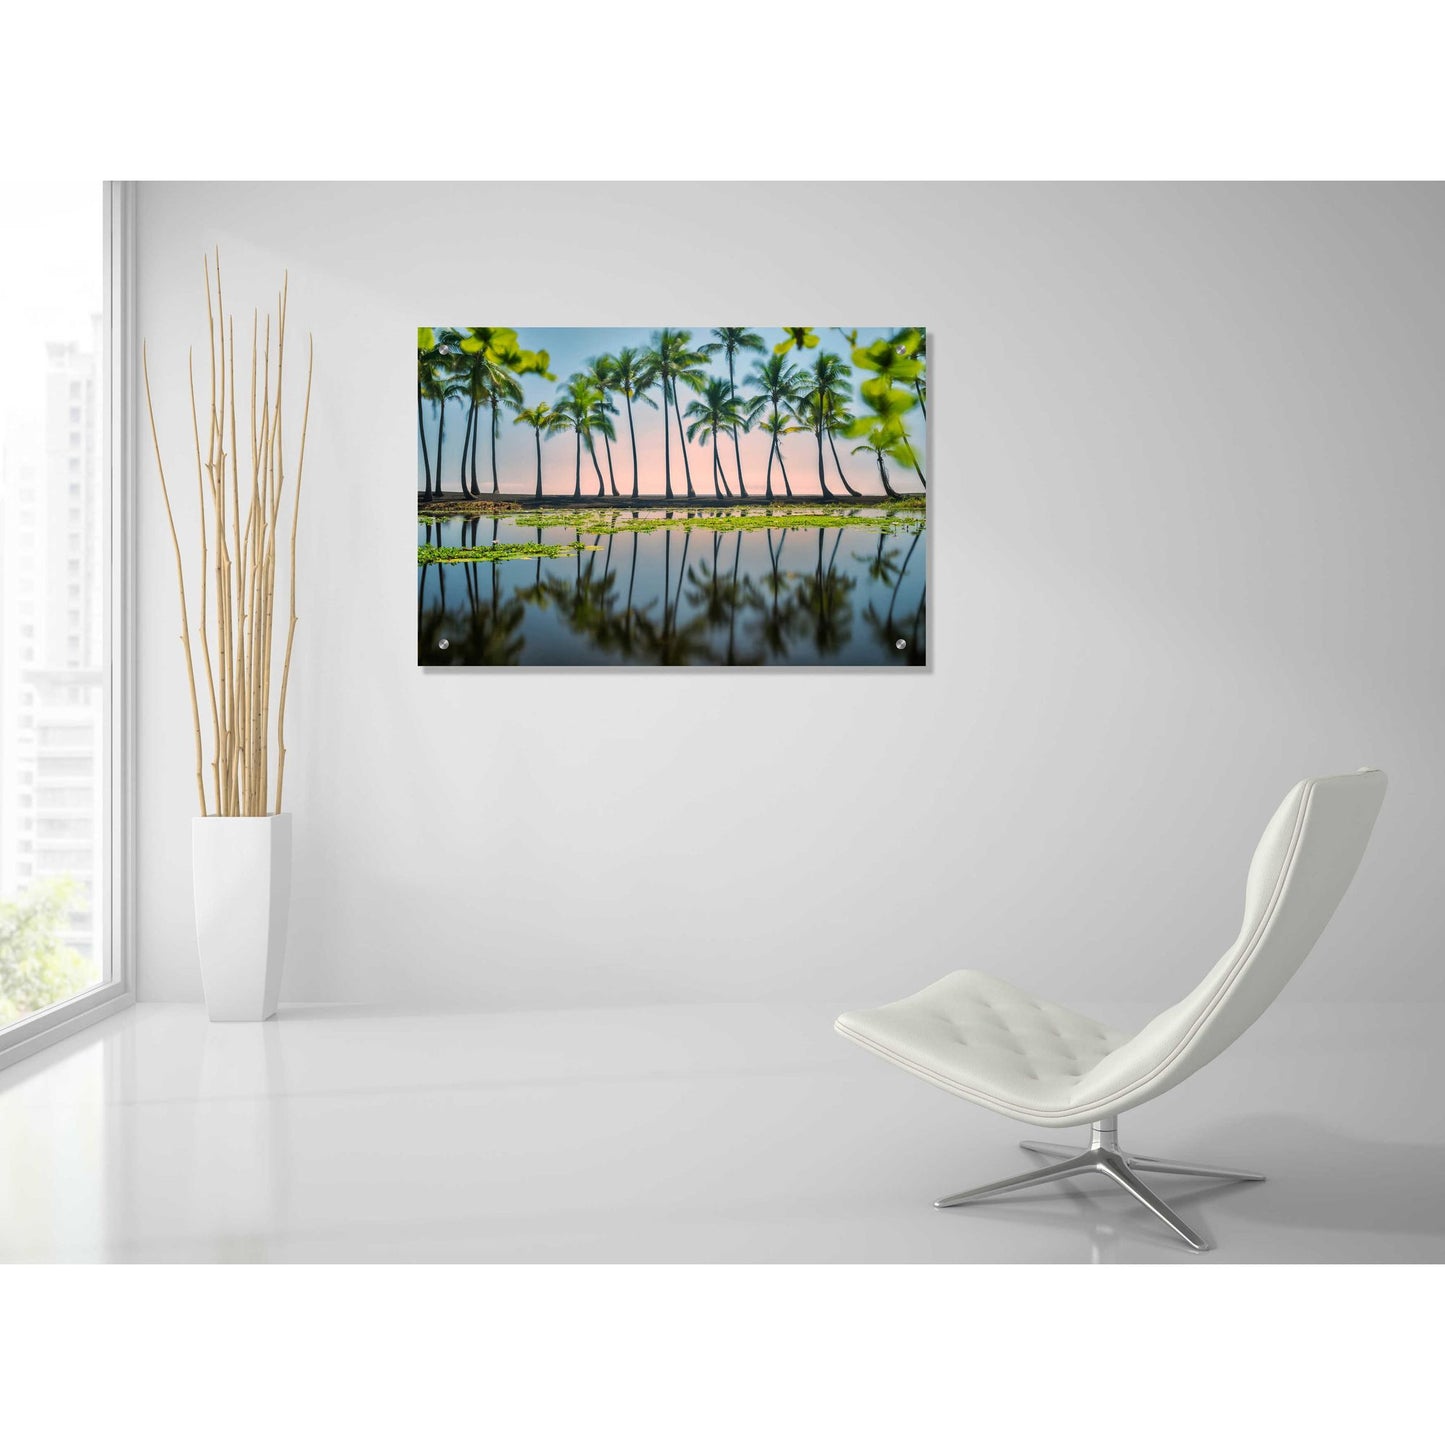 Epic Art 'Palm Tree Reflections' by Dennis Frates, Acrylic Glass Wall Art,36x24